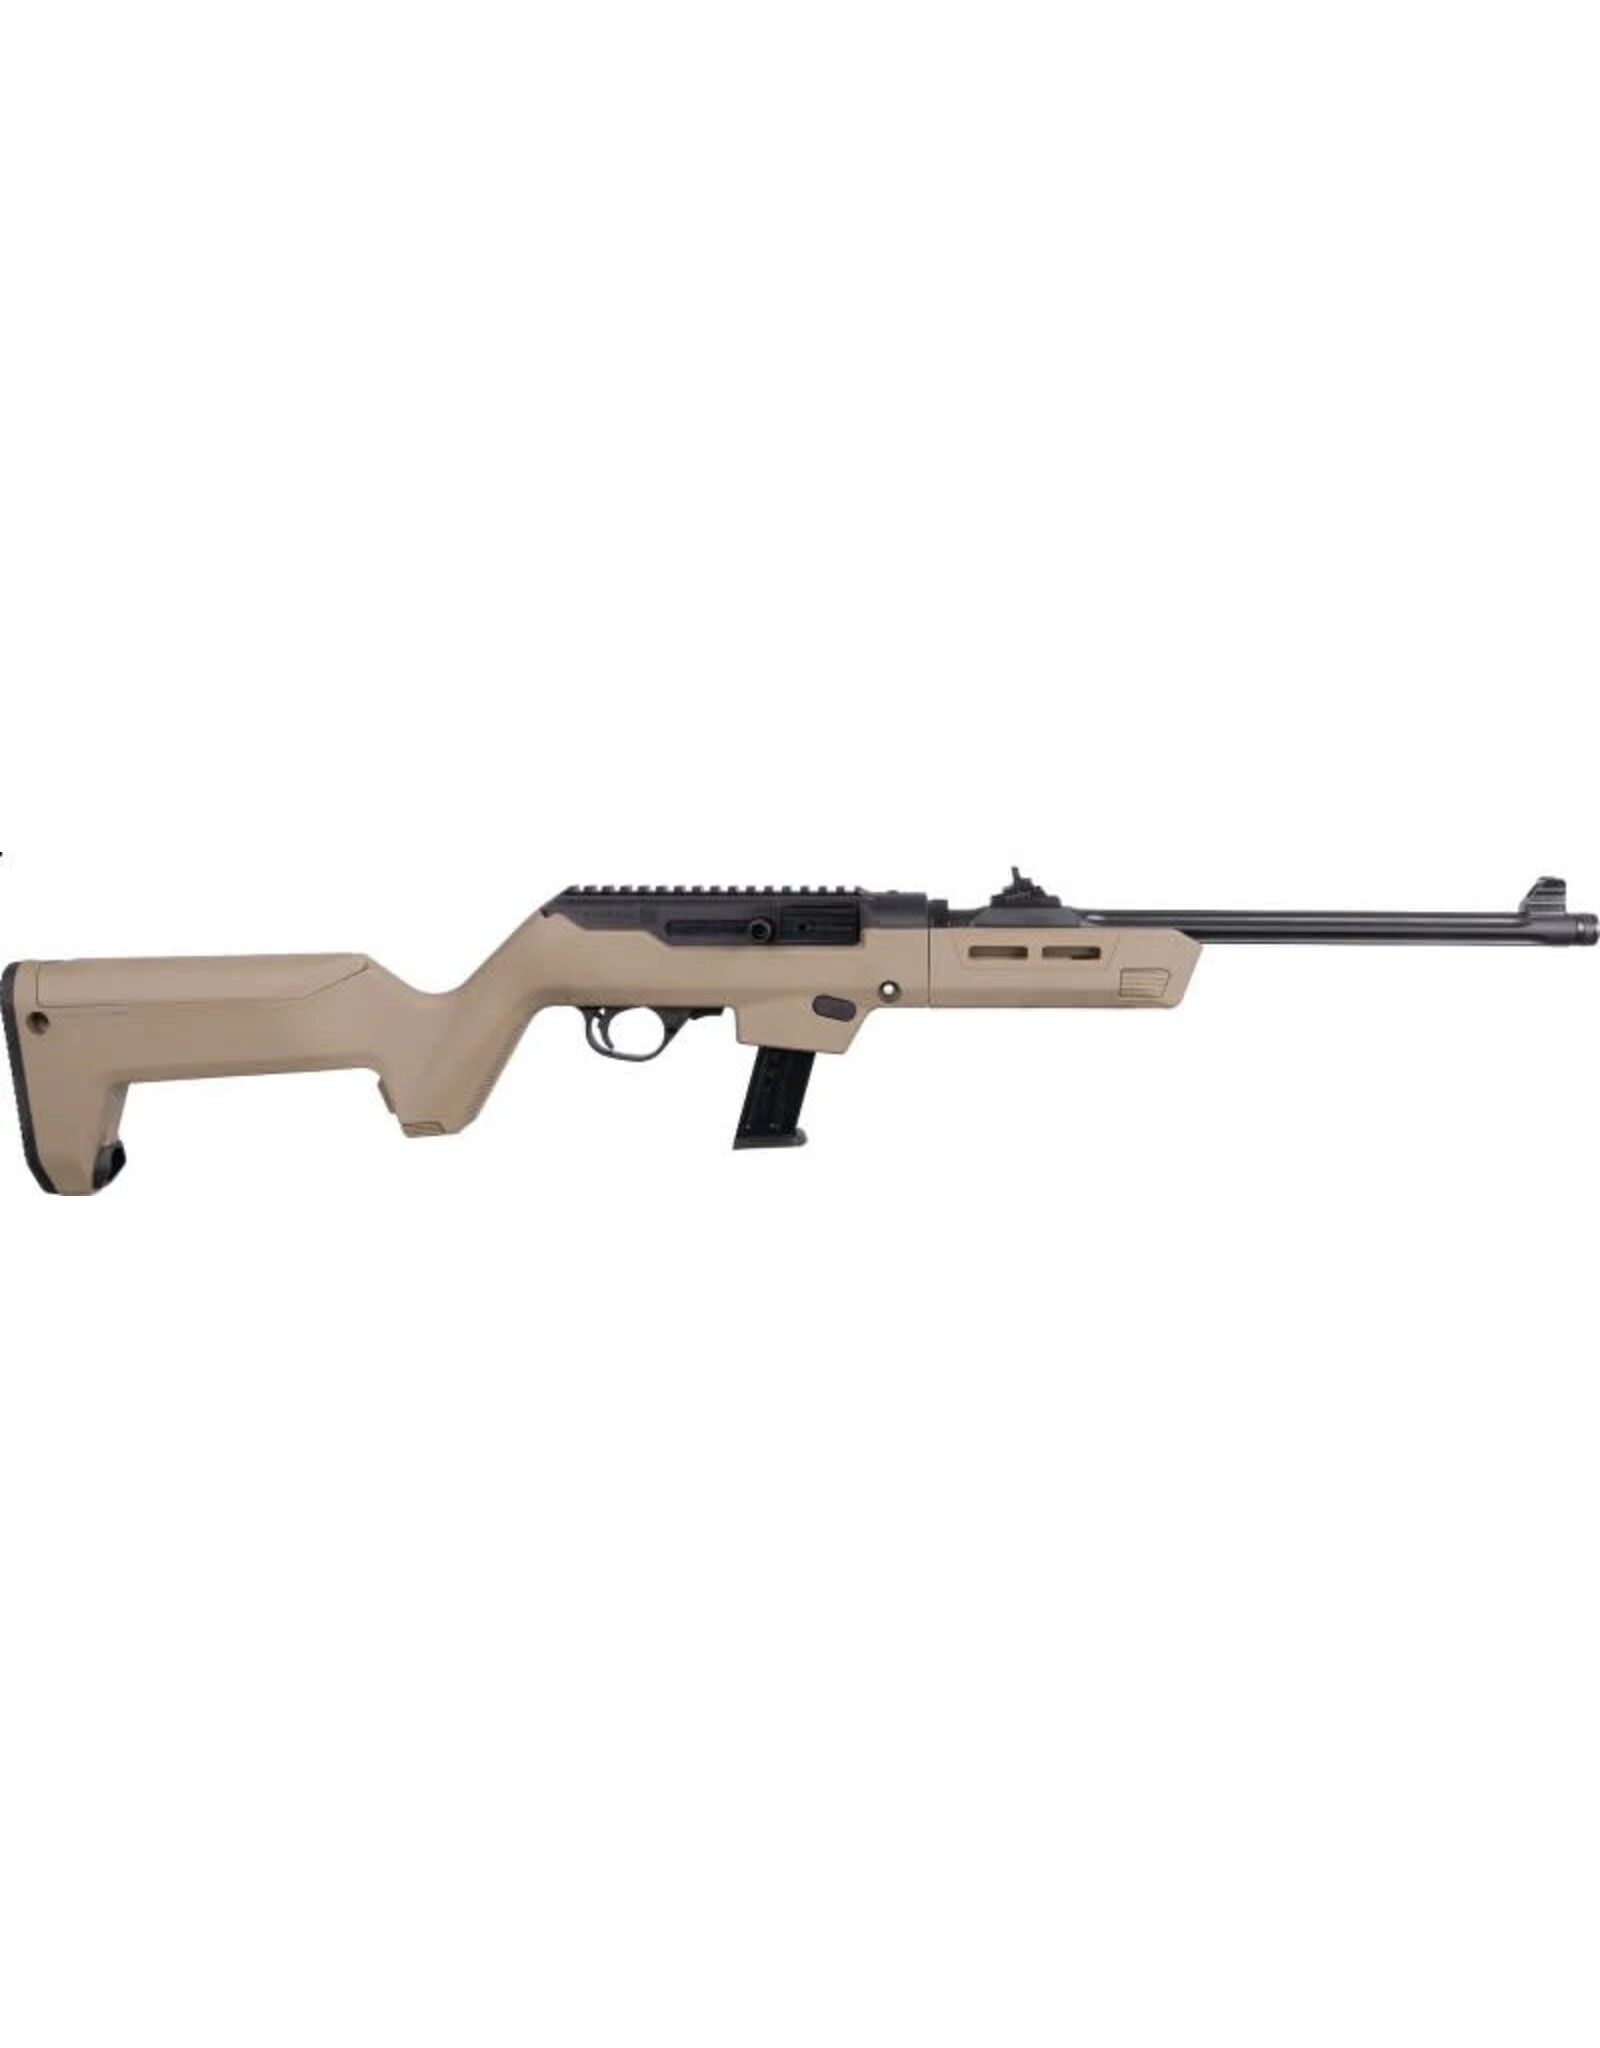 Ruger PC Carbine TD Magpul Stock 9mm - 16.12" bbl - 17 Round